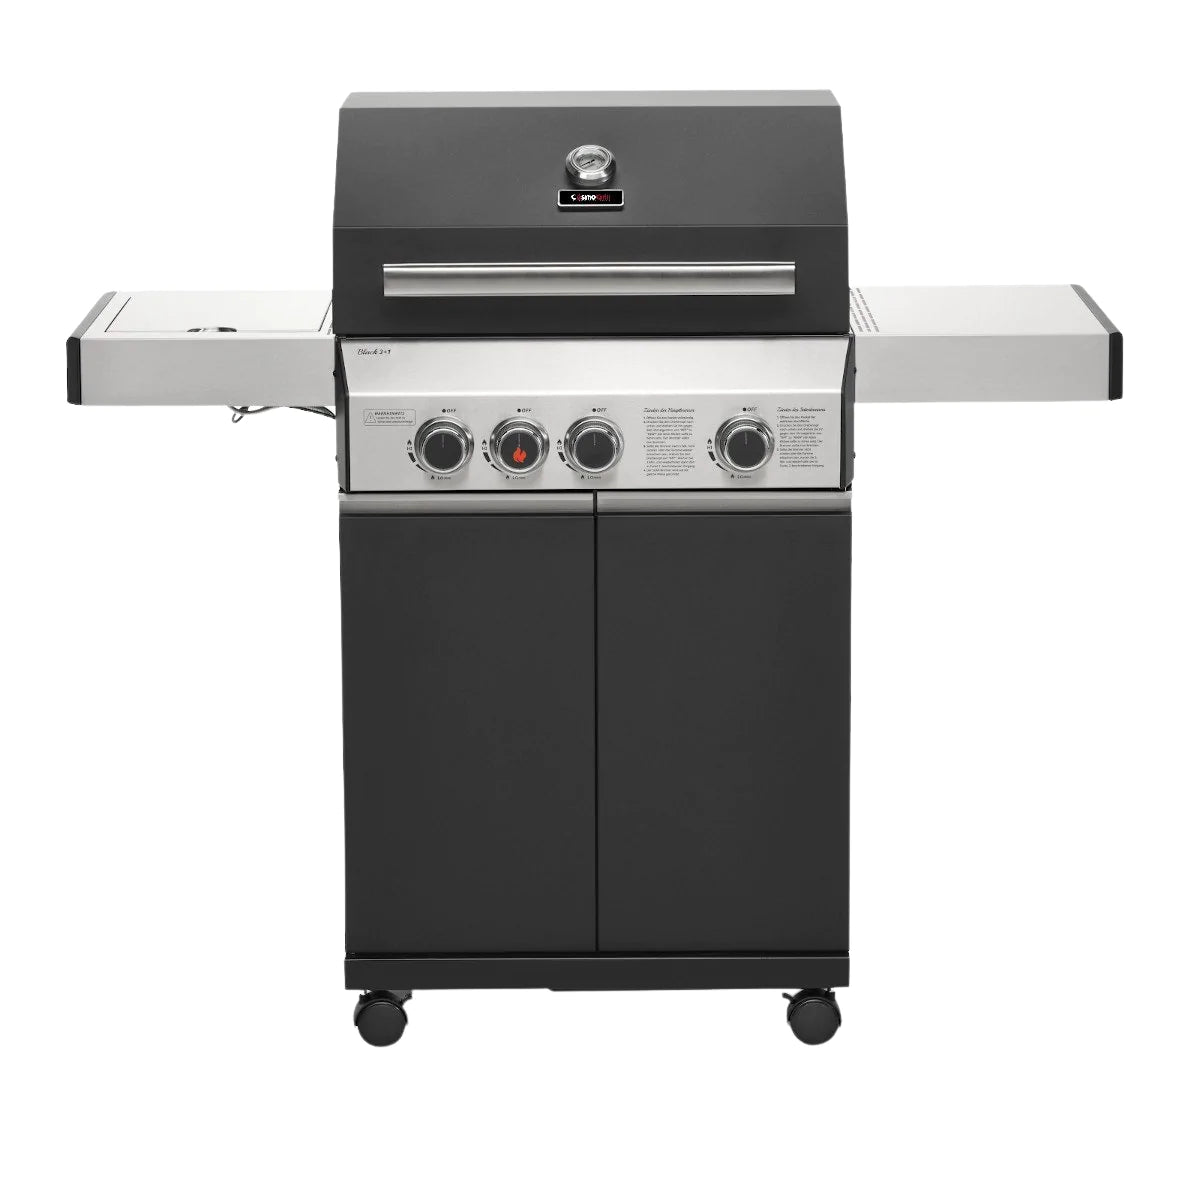 CosmoGrill Premium Black 3+1 Gas Barbecue Front View